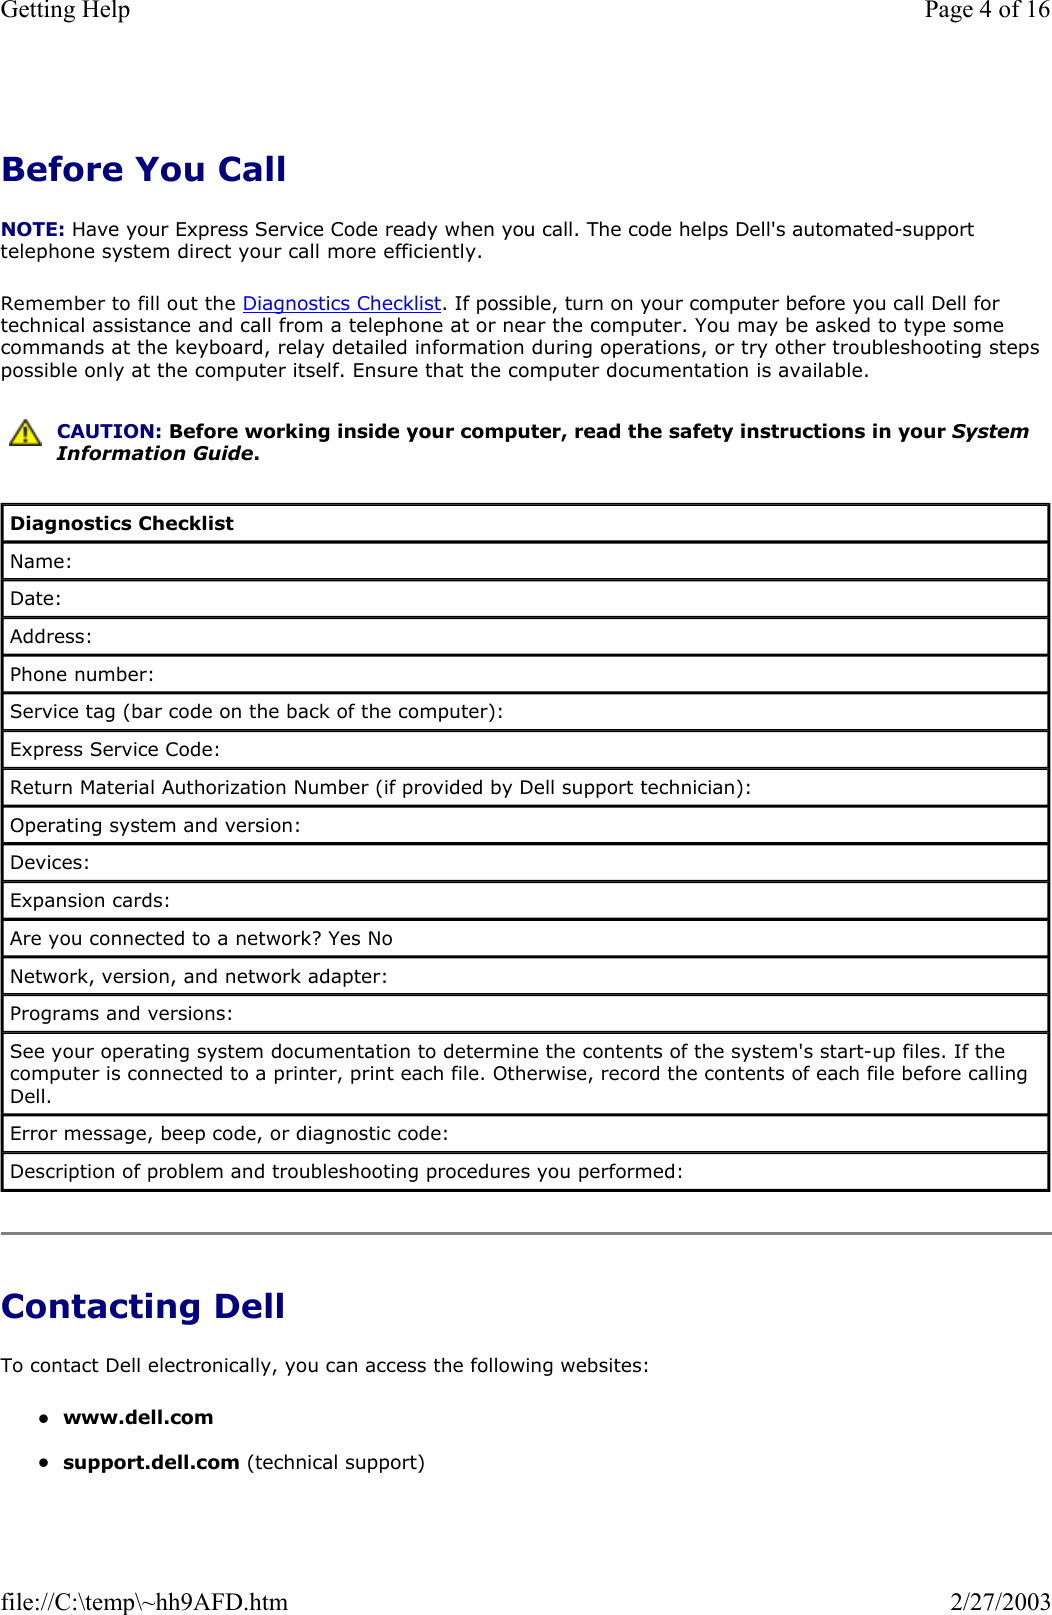 Before You Call NOTE: Have your Express Service Code ready when you call. The code helps Dell&apos;s automated-support telephone system direct your call more efficiently. Remember to fill out the Diagnostics Checklist. If possible, turn on your computer before you call Dell for technical assistance and call from a telephone at or near the computer. You may be asked to type some commands at the keyboard, relay detailed information during operations, or try other troubleshooting steps possible only at the computer itself. Ensure that the computer documentation is available.  Contacting Dell To contact Dell electronically, you can access the following websites: zwww.dell.com  zsupport.dell.com (technical support)   CAUTION: Before working inside your computer, read the safety instructions in your System Information Guide.Diagnostics Checklist Name: Date: Address: Phone number: Service tag (bar code on the back of the computer): Express Service Code: Return Material Authorization Number (if provided by Dell support technician): Operating system and version: Devices: Expansion cards: Are you connected to a network? Yes No Network, version, and network adapter: Programs and versions: See your operating system documentation to determine the contents of the system&apos;s start-up files. If the computer is connected to a printer, print each file. Otherwise, record the contents of each file before calling Dell. Error message, beep code, or diagnostic code: Description of problem and troubleshooting procedures you performed: Page 4 of 16Getting Help2/27/2003file://C:\temp\~hh9AFD.htm